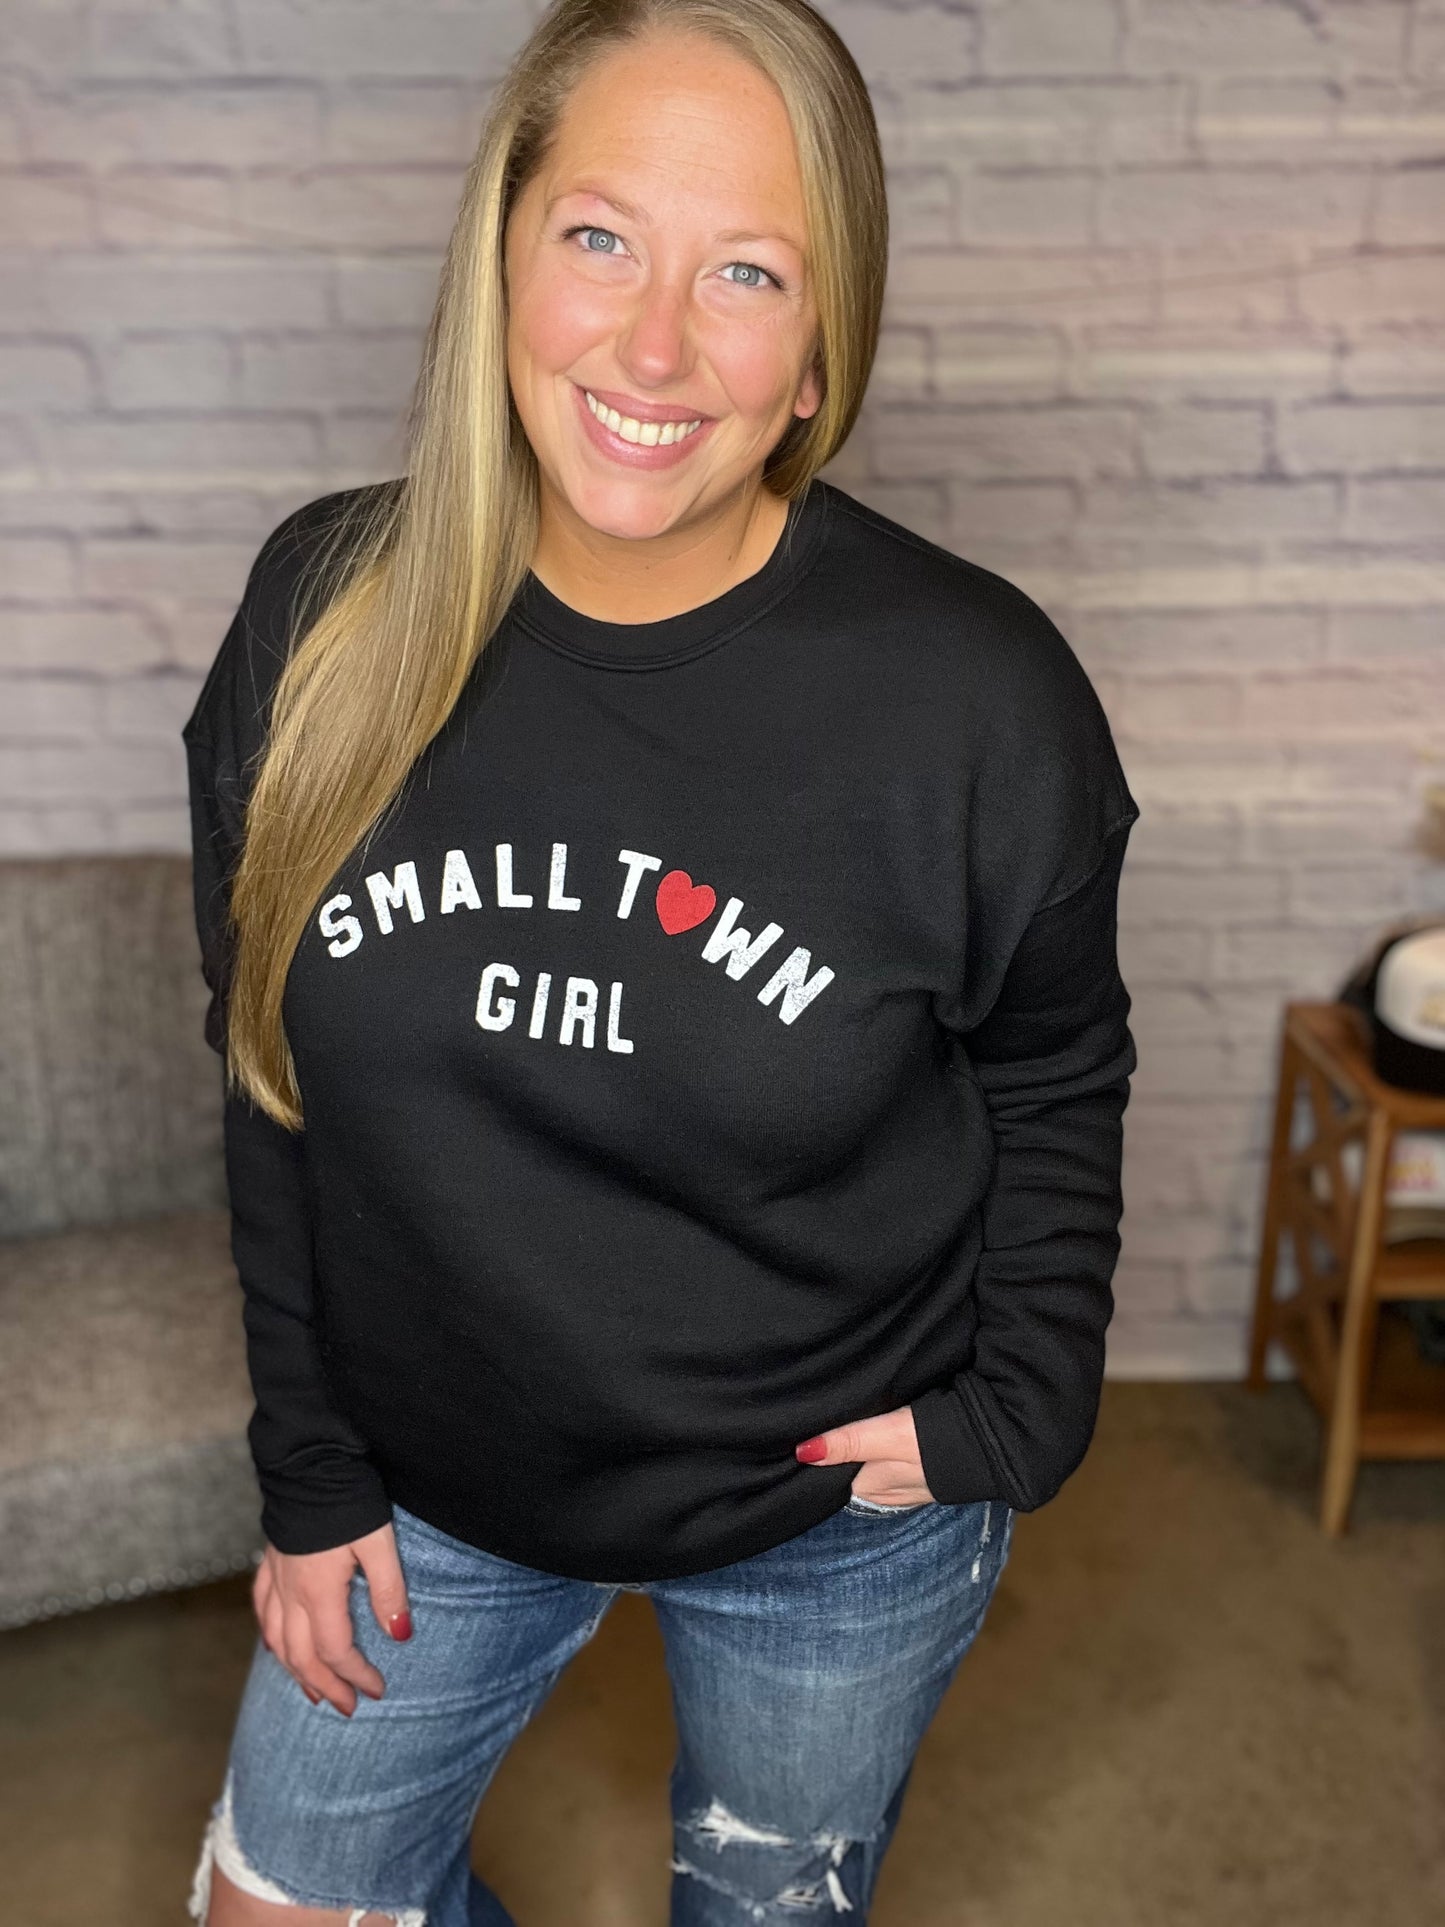 Small Town Girl Graphic Crewneck Sweatshirt by Oat Collective